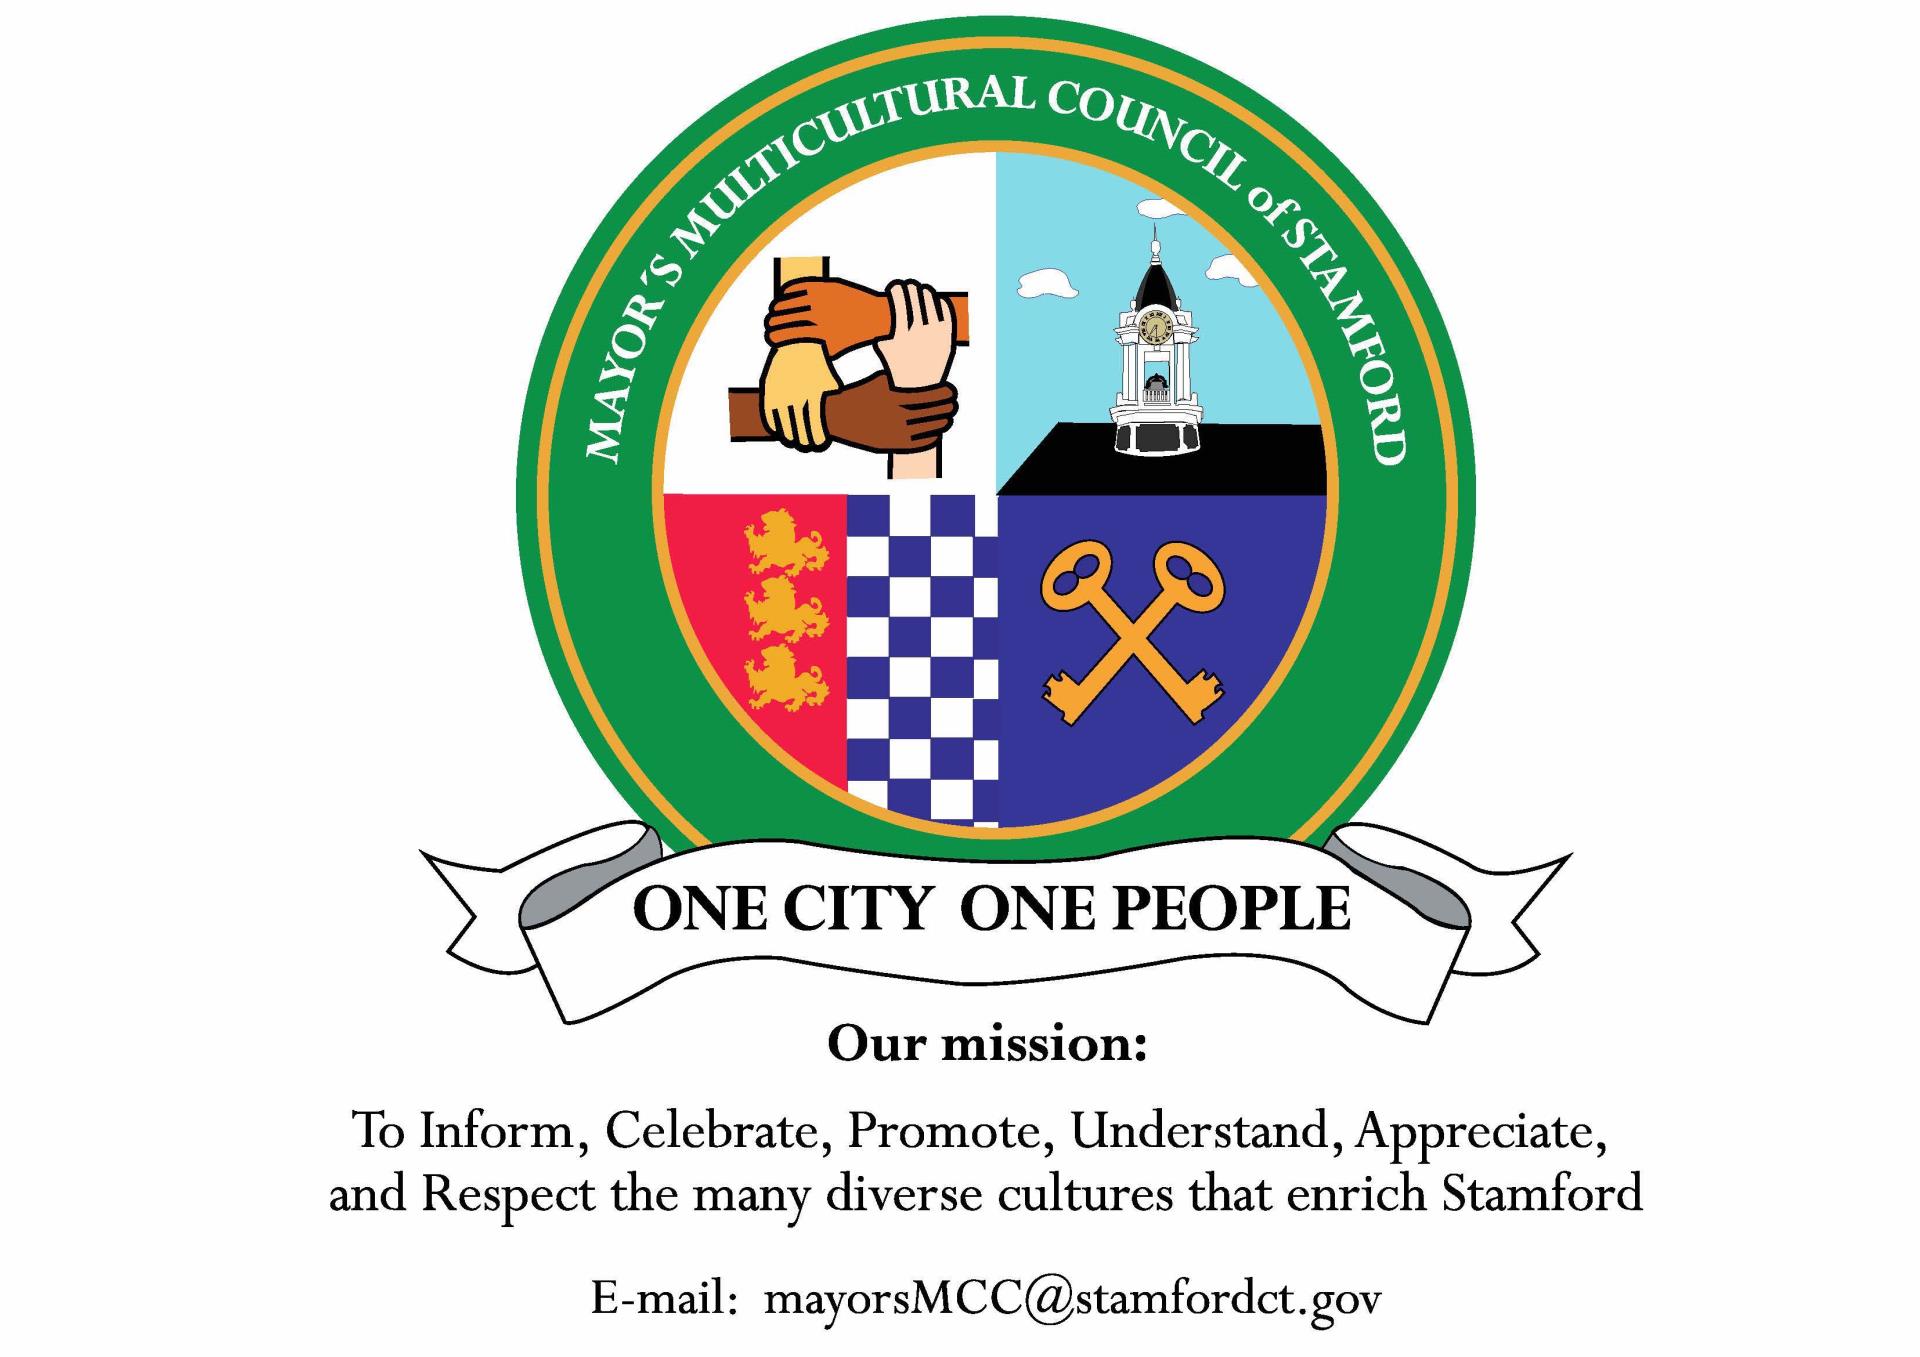 MMC Seal and stated mission to inform, celebrate, promote, understand, appreciate, and respect the many diverse cultures that enrich the City of Stamford.